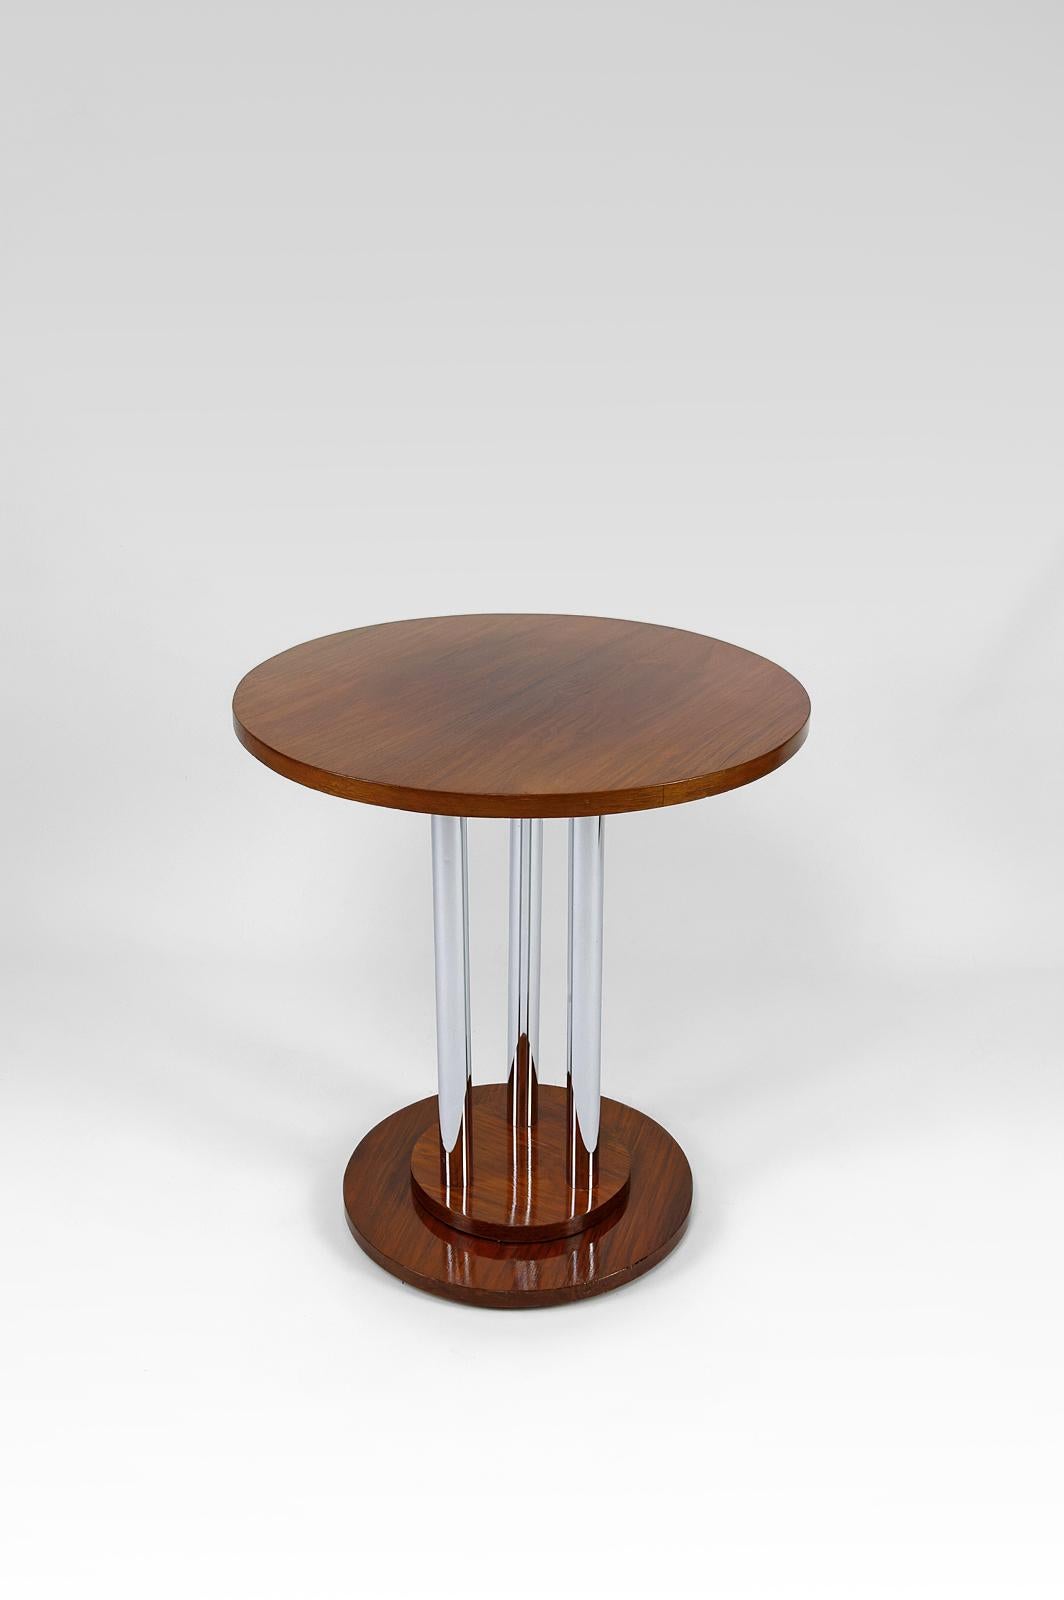 French Modernist Art Deco pedestal table in walnut and chrome, France, Circa 1930 For Sale